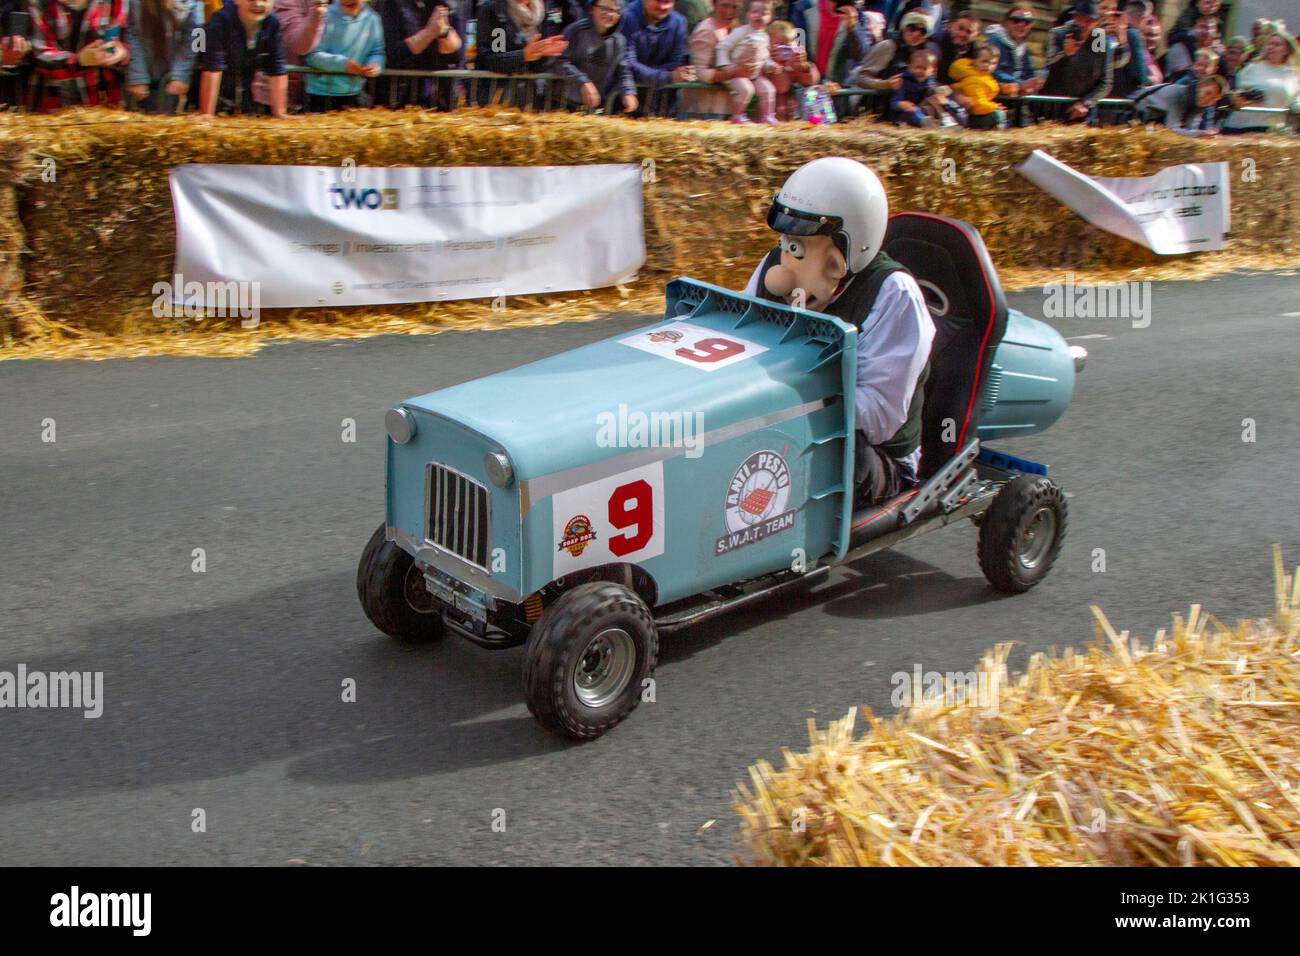 Longridge, Preston. UK News 18 September 2022; Soapbox Derby community charity event happening in the heart of the village. A day of “family fun, racing, wacky costumes and carts, thrills and spills” attracted thousands of visitors to the town's main street. Motorless, hand-made, wooden vehicles raced down Berry Lane as the village's main high street was converted into an unusual race track for the day. The event has been organised to raise vital funds for local charity Longridge Community Action. 'Ratty' entrant Dave driving Anti-Pesto Wheelie Bin. Credit ; MediaWorldImages/Alamy LiveNews Stock Photo